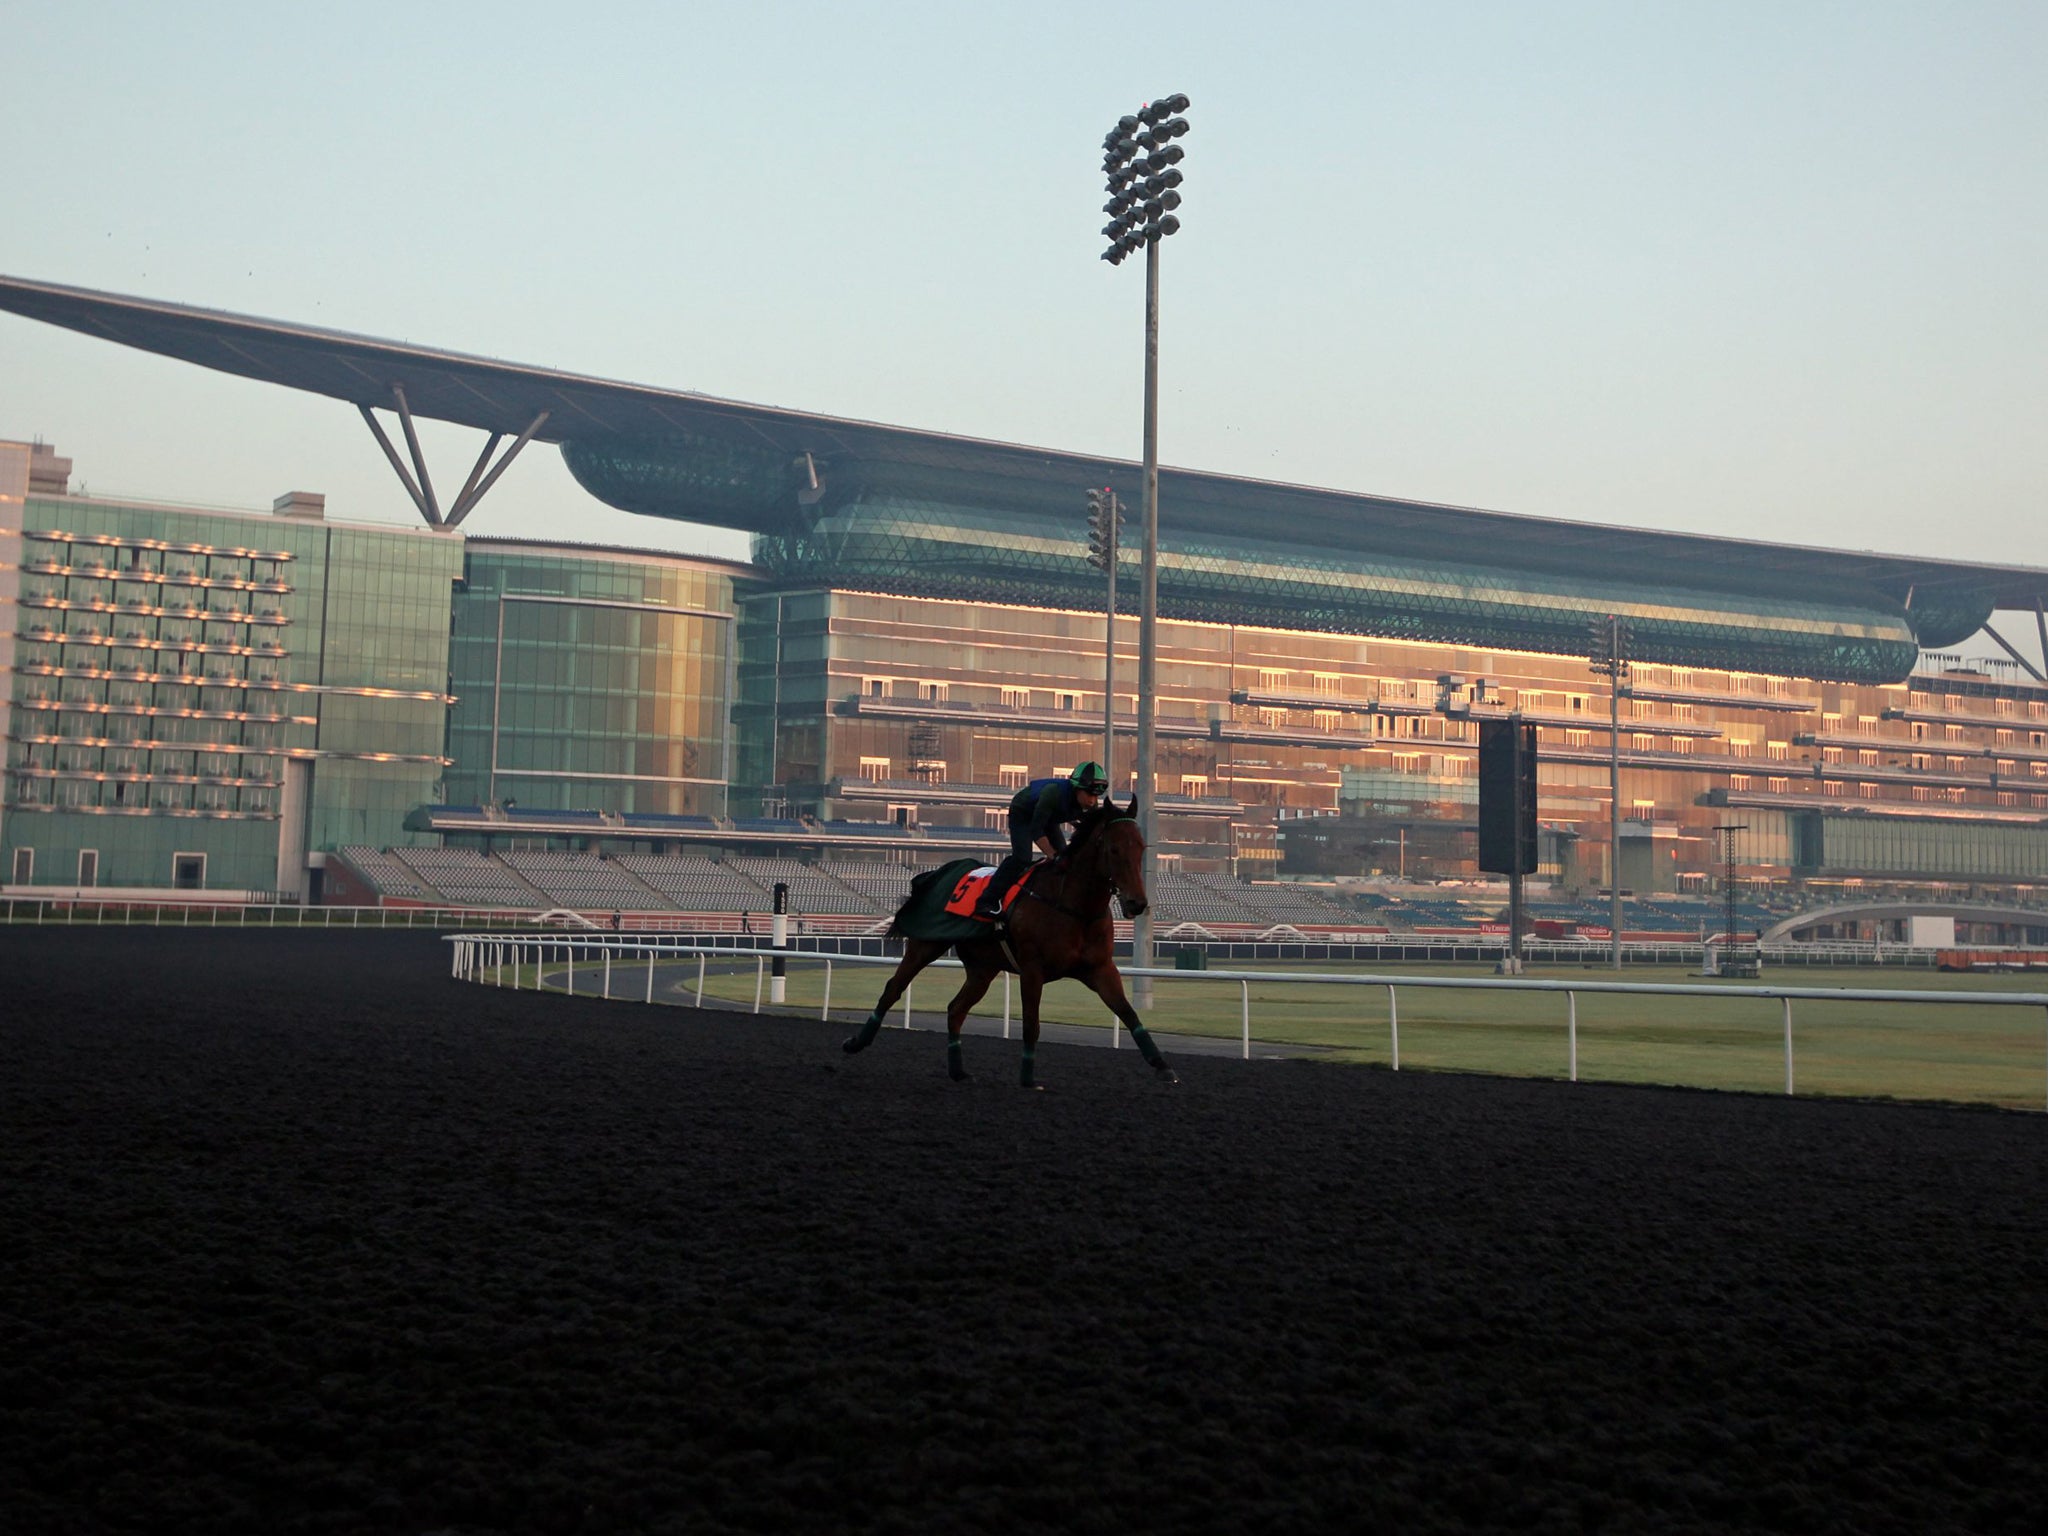 A jockey rides Hong Kong’s racehorse ‘Joy And Fun’ trained by Derek Cruz on the track of Meydan racecourse during preparations for the Dubai World Cup